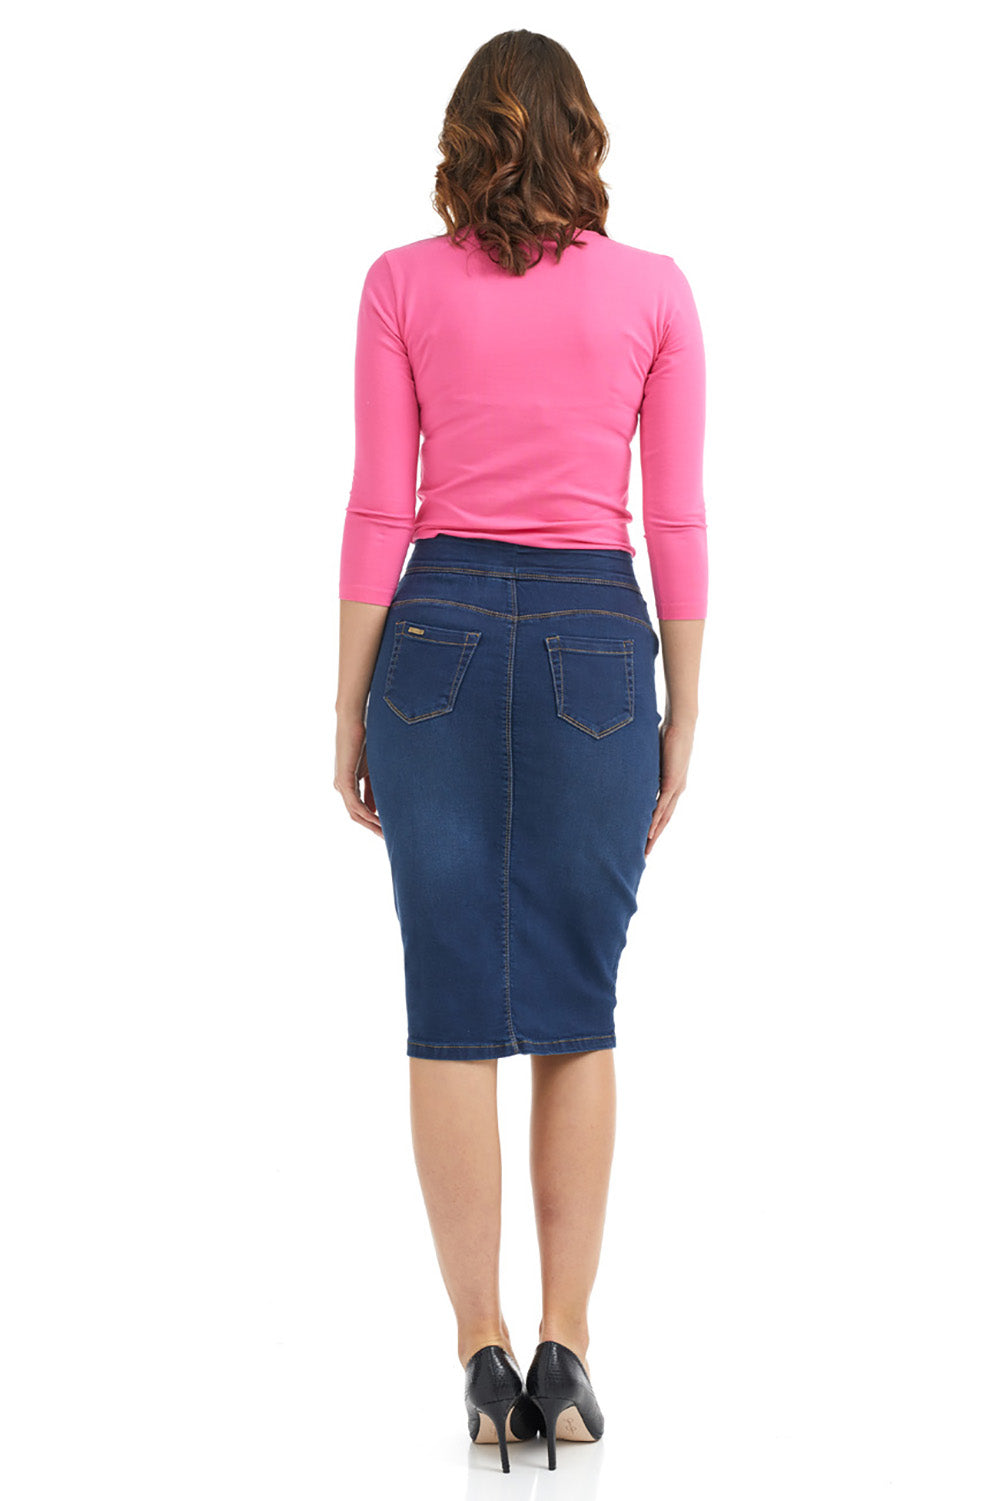 tznius blue jean pencil skirt without pockets or slits